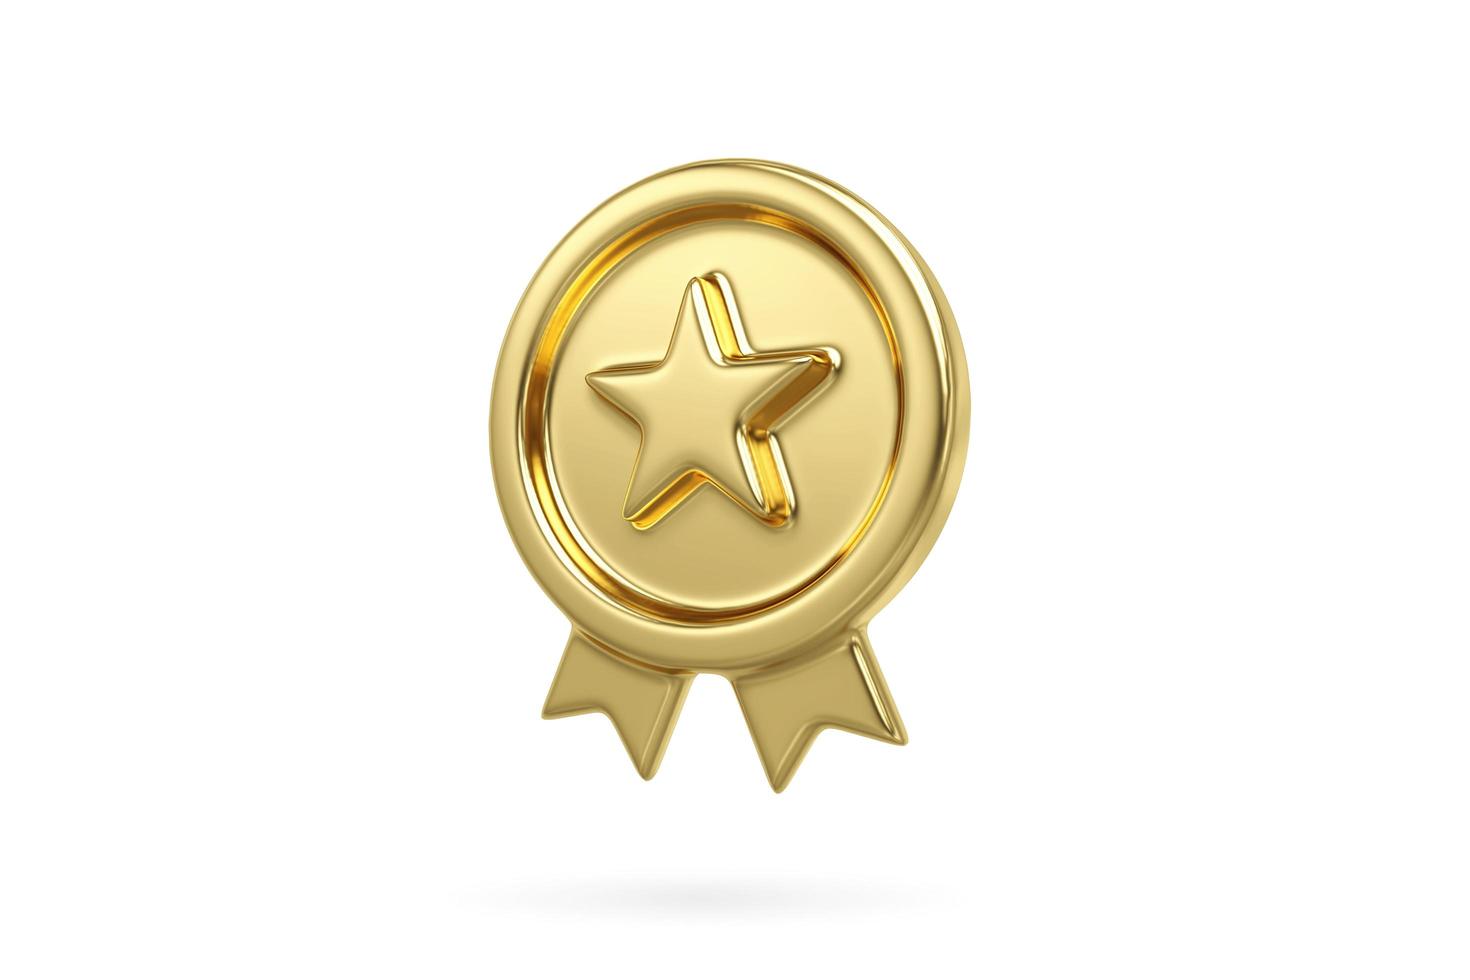 Gold metal star icon isolated on white background. Premium quality guarantee label photo